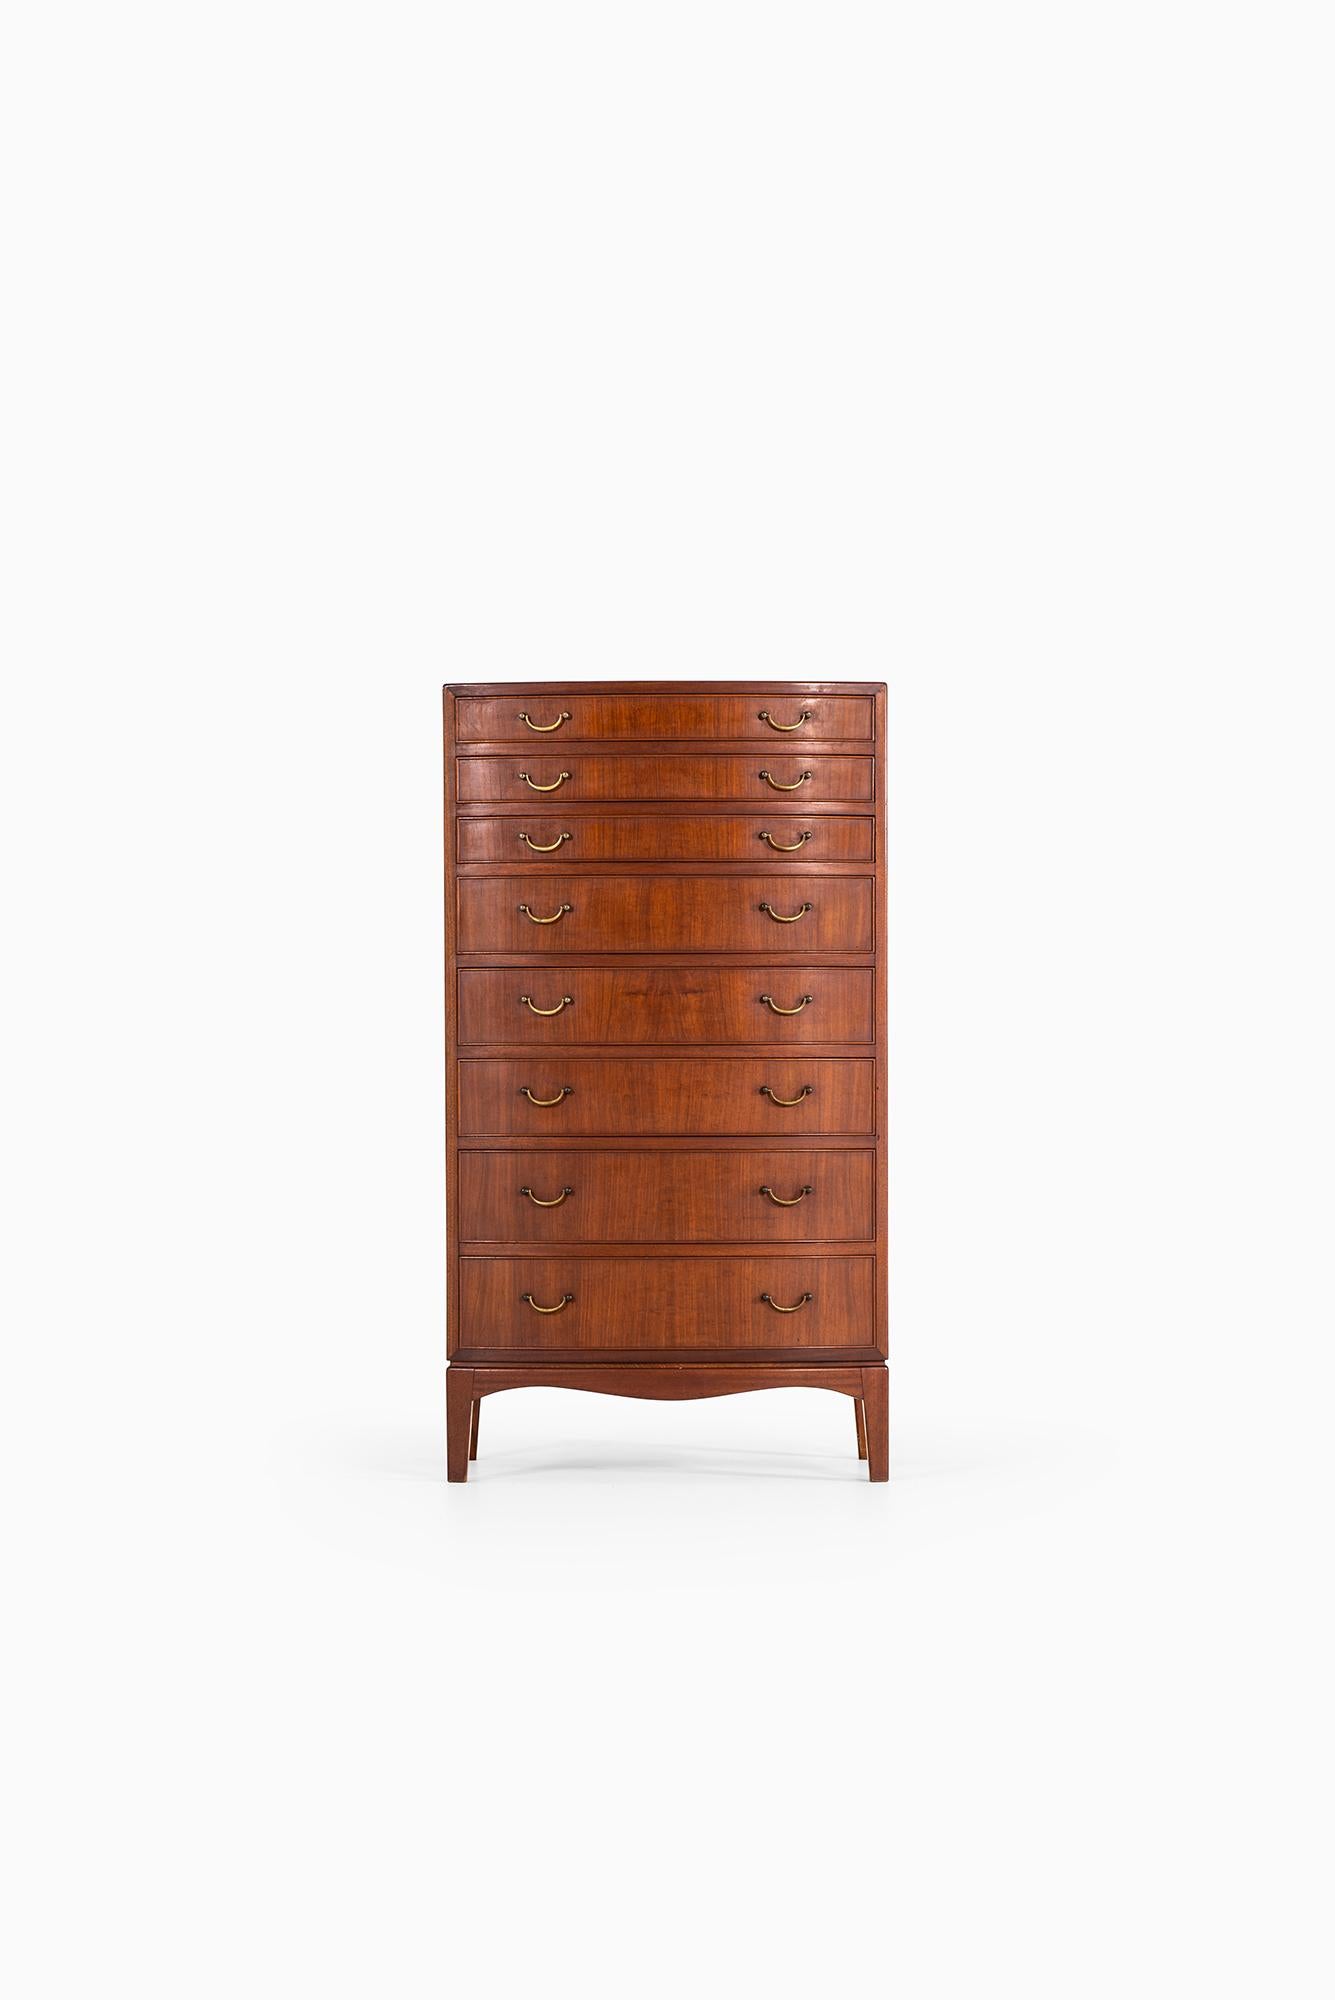 Very rare chest of drawers designed by Ole Wanscher. Produced by cabinetmaker A.J Iversen in Denmark.